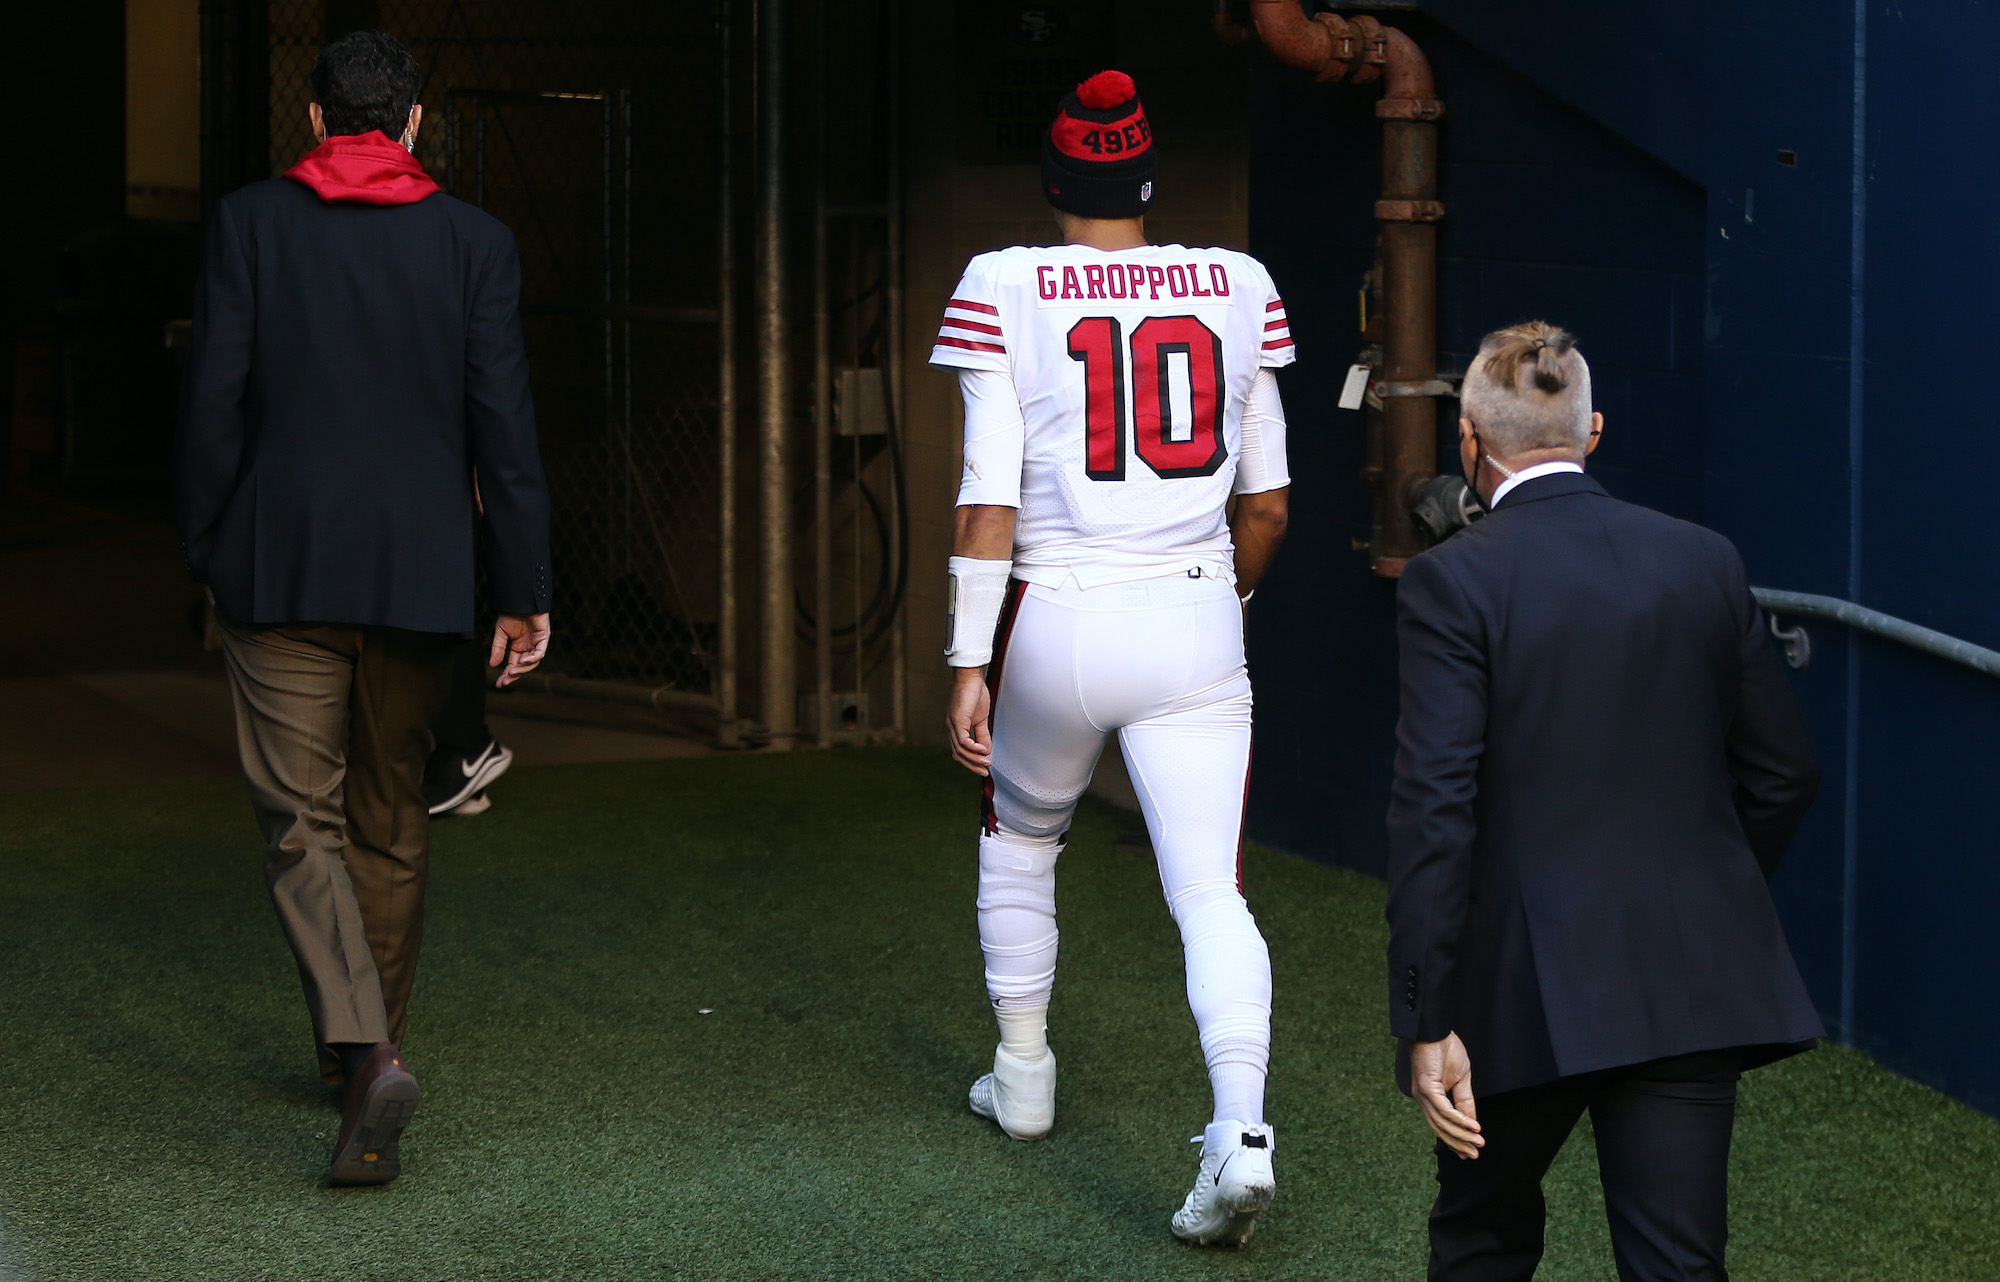 SEATTLE, WASHINGTON - NOVEMBER 01: Quarterback Jimmy Garoppolo #10 of the San Francisco 49ers exits the field as they play the at the start of the fourth quarter of the game at CenturyLink Field on November 01, 2020 in Seattle, Washington. (Photo by Abbie Parr/Getty Images)